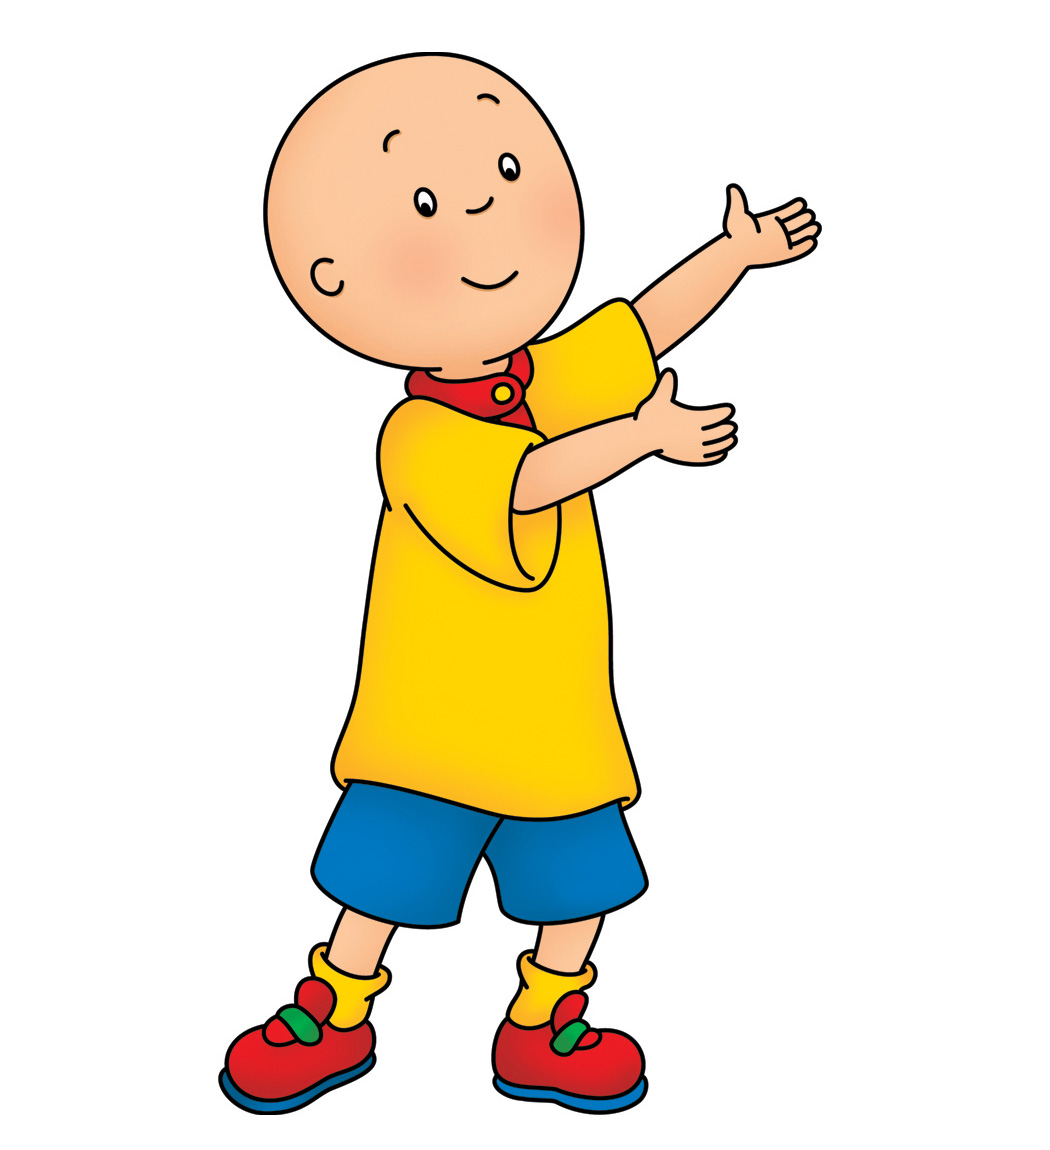 Caillou-xl-pictures-34.jpg